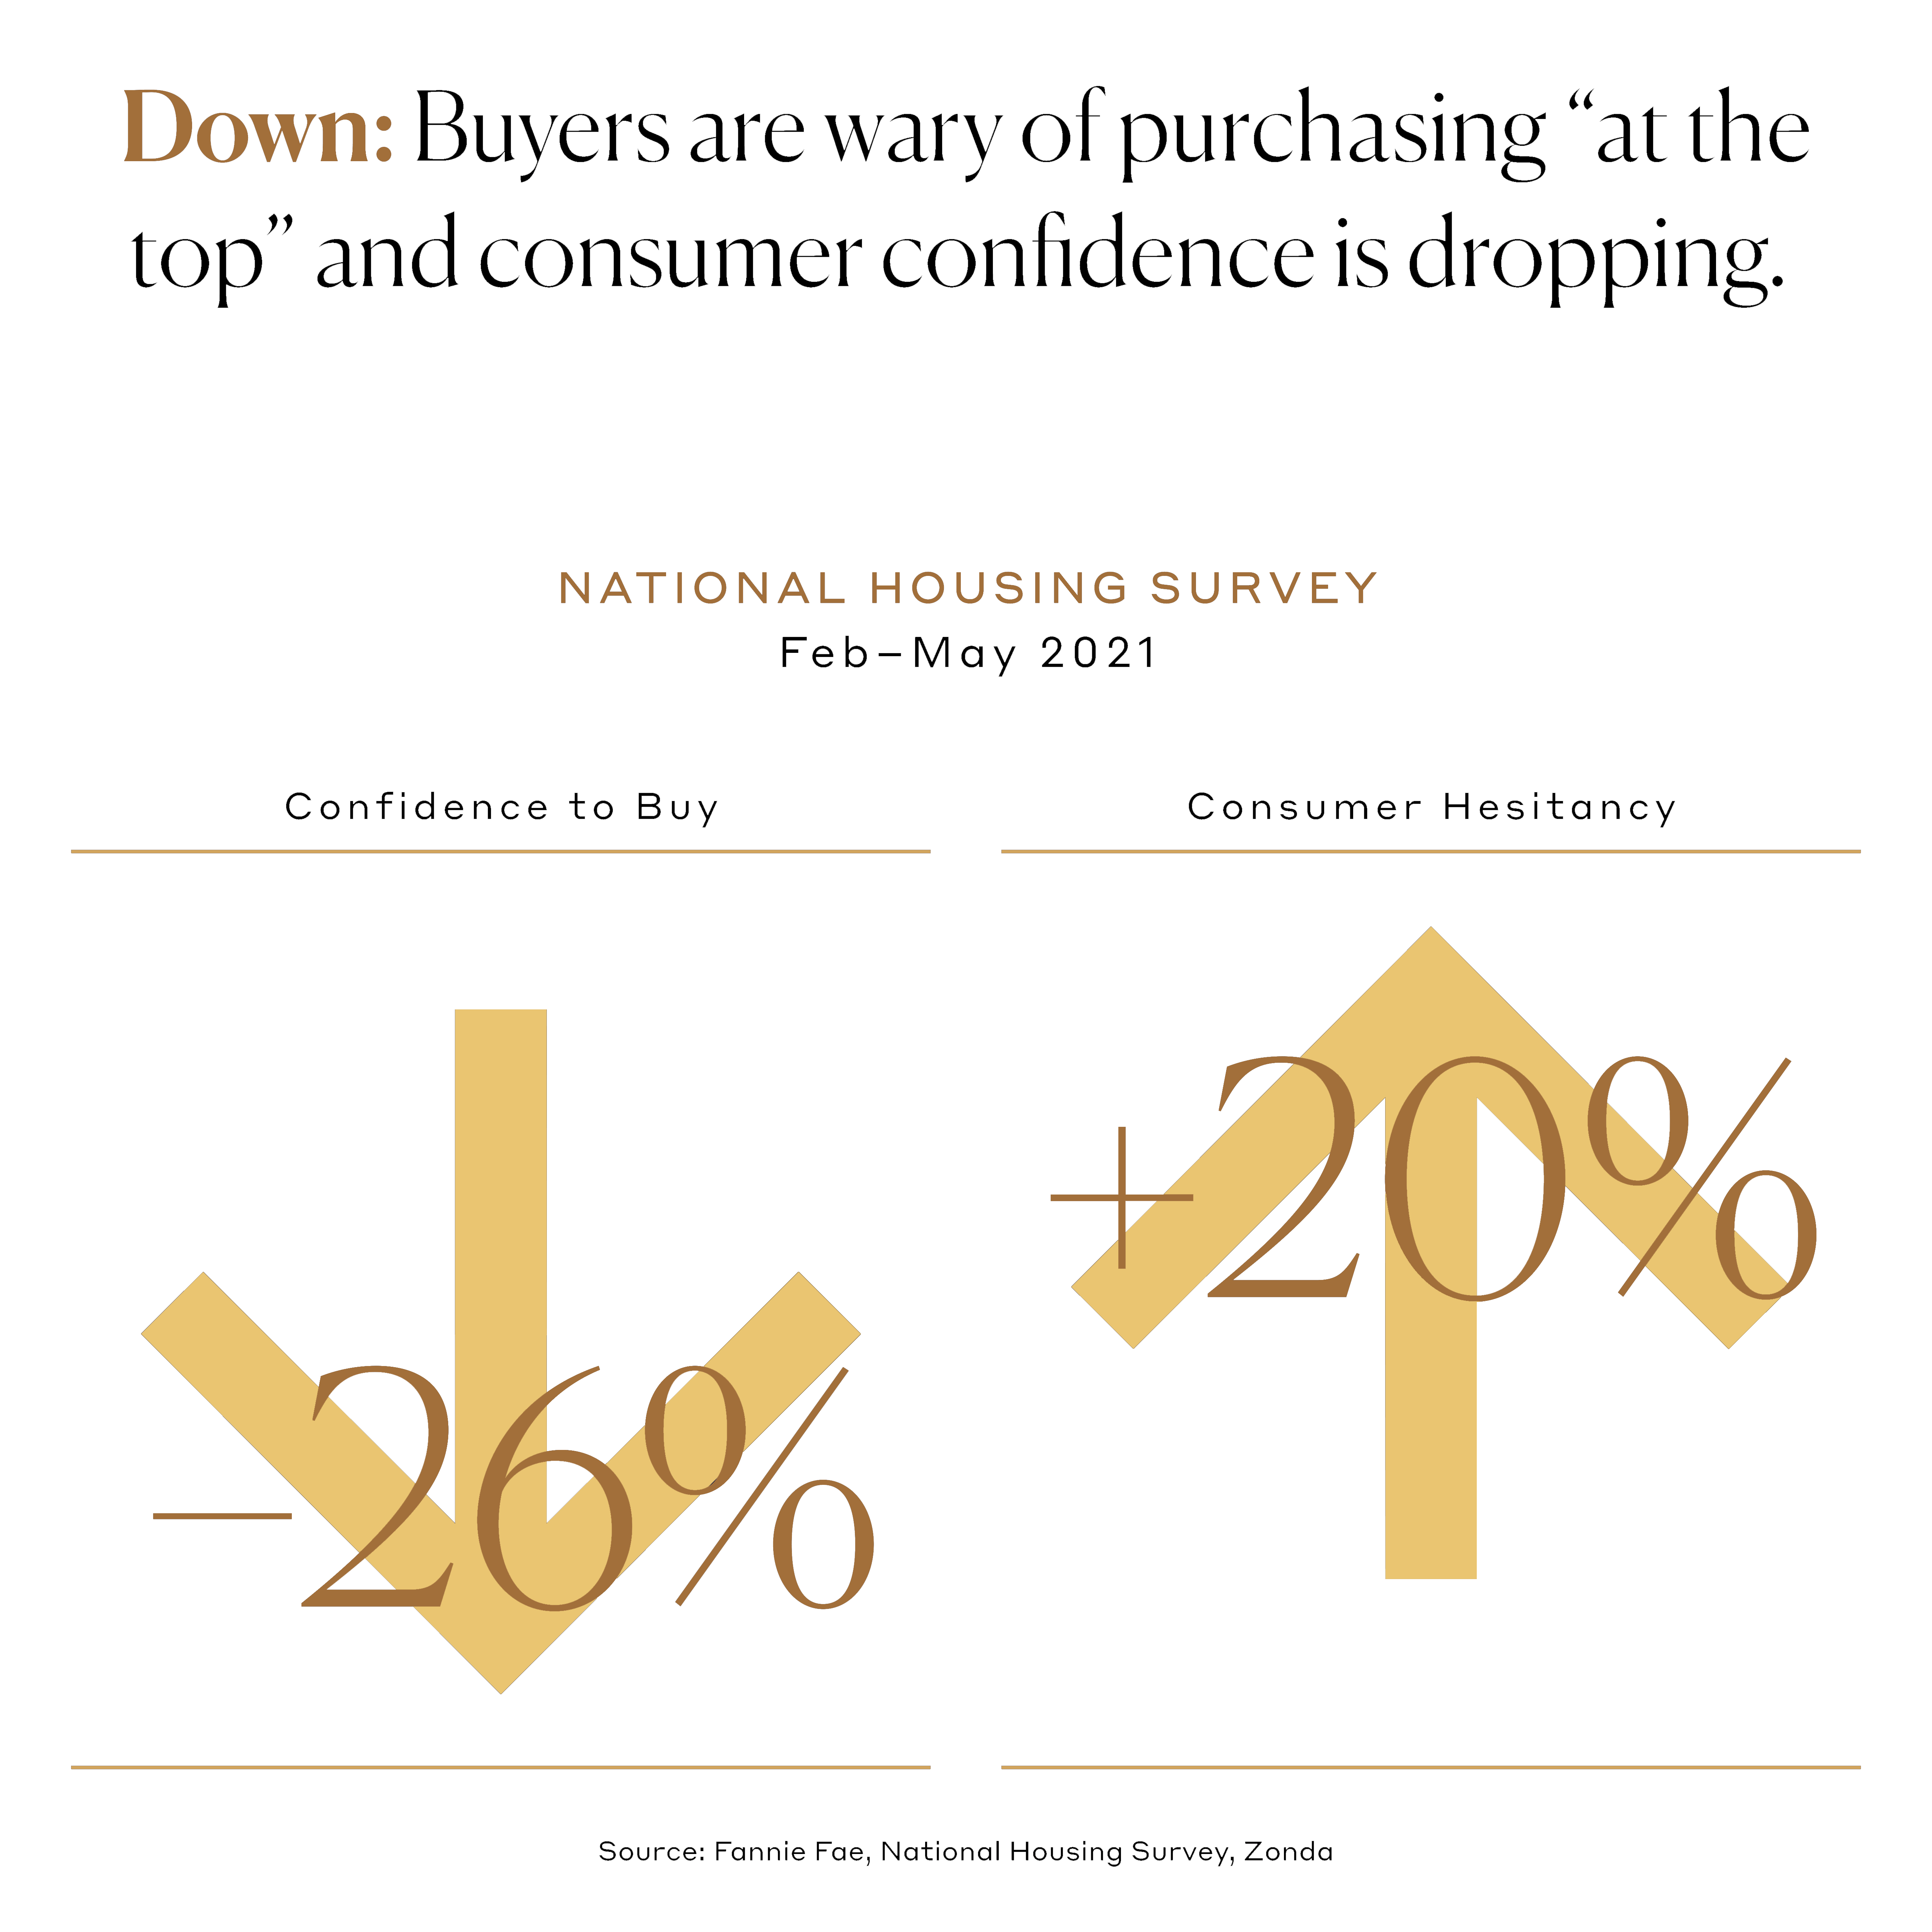 Down: Buyers are wary of purchasing 